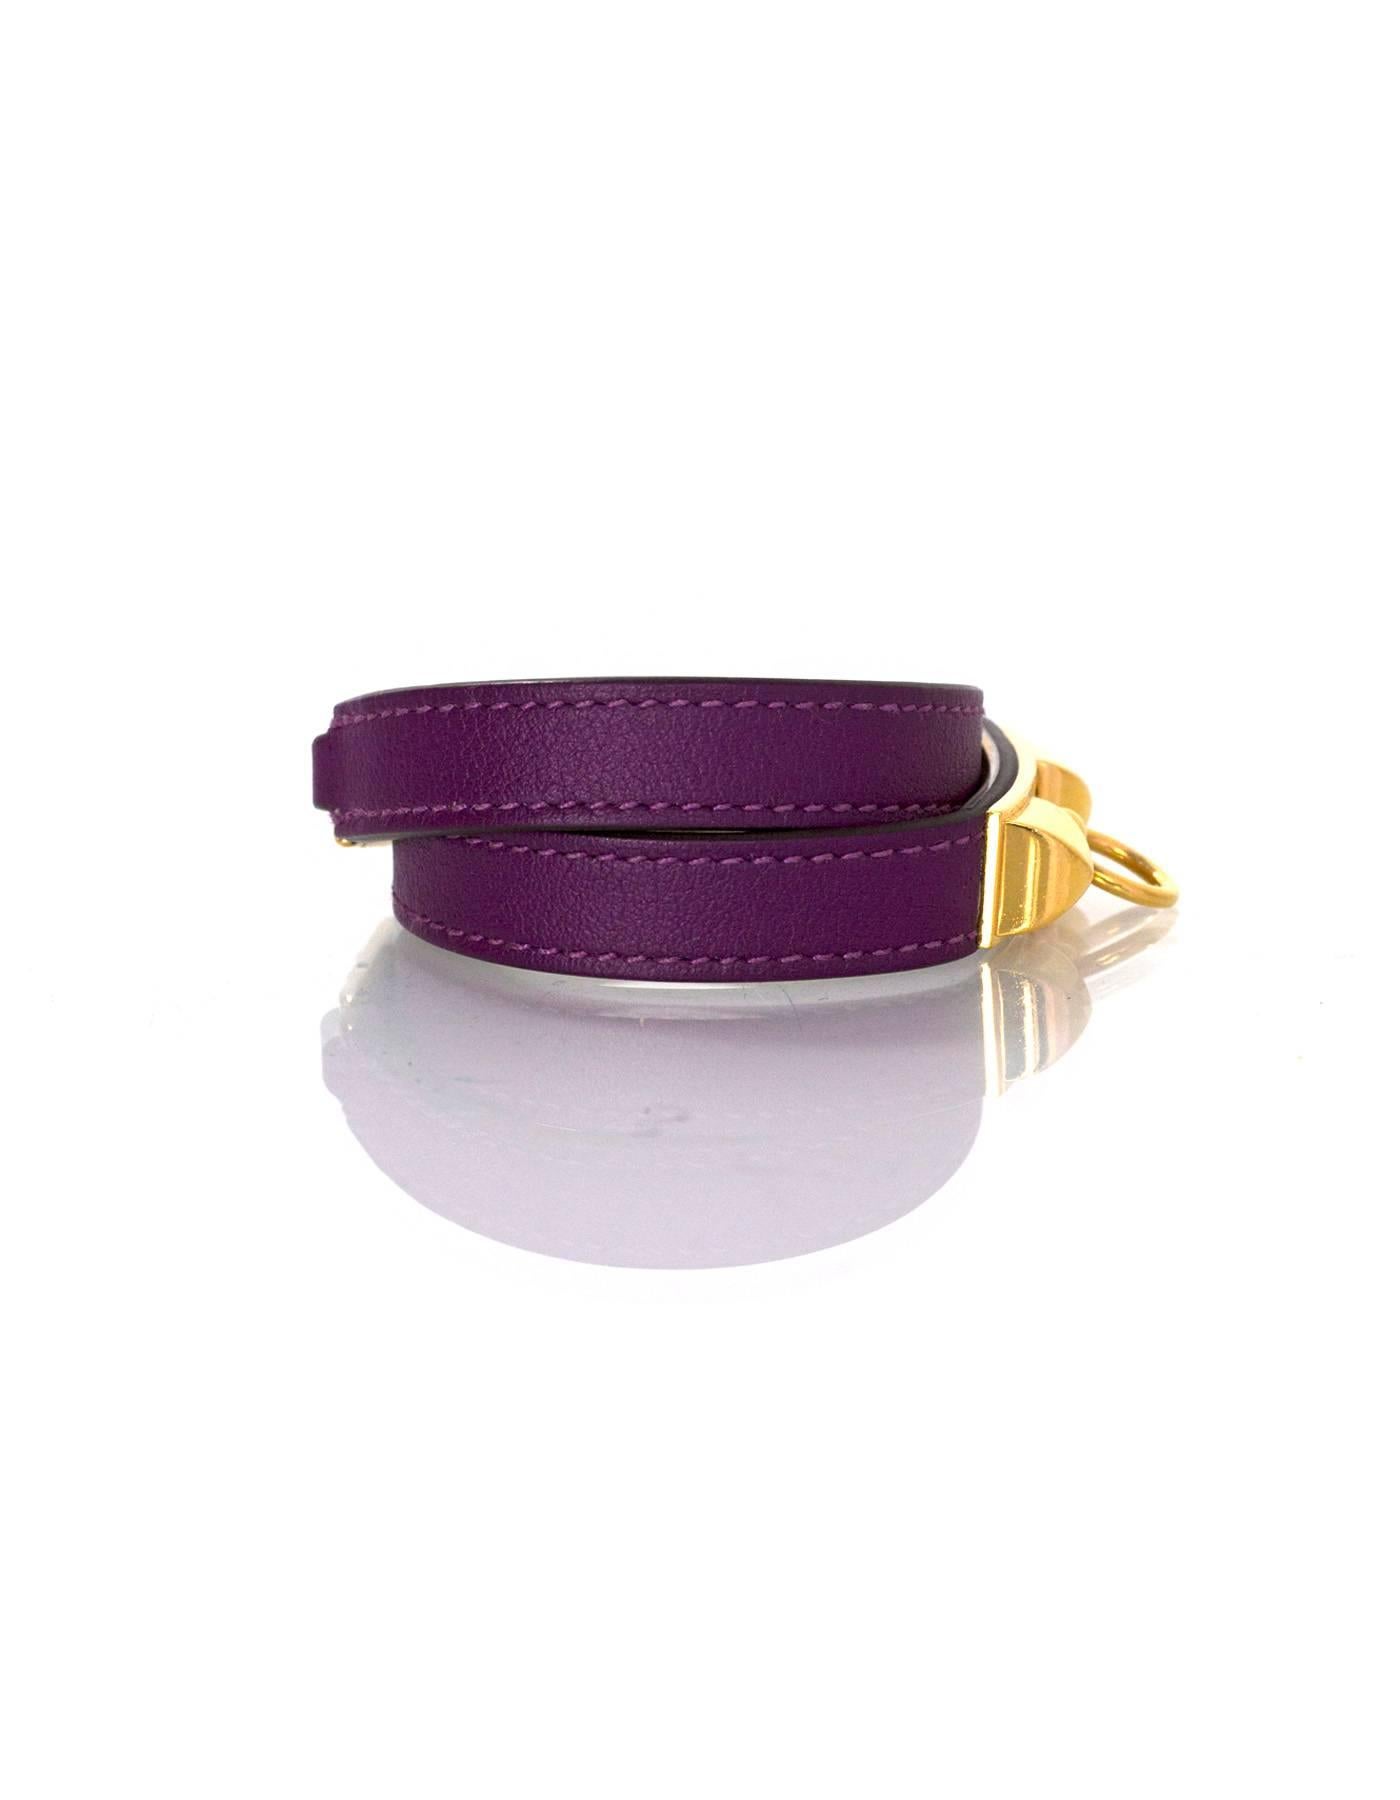 Hermes Purple Rivale Double Tour Bracelet Sz S

Made In: France
Year of Production: 2014
Color: Purple, gold
Hardware: Goldtone
Materials: Swift leather and metal
Closure: Hook clasp
Stamp: R stamp in square
Retail Price: $560 + tax
Overall